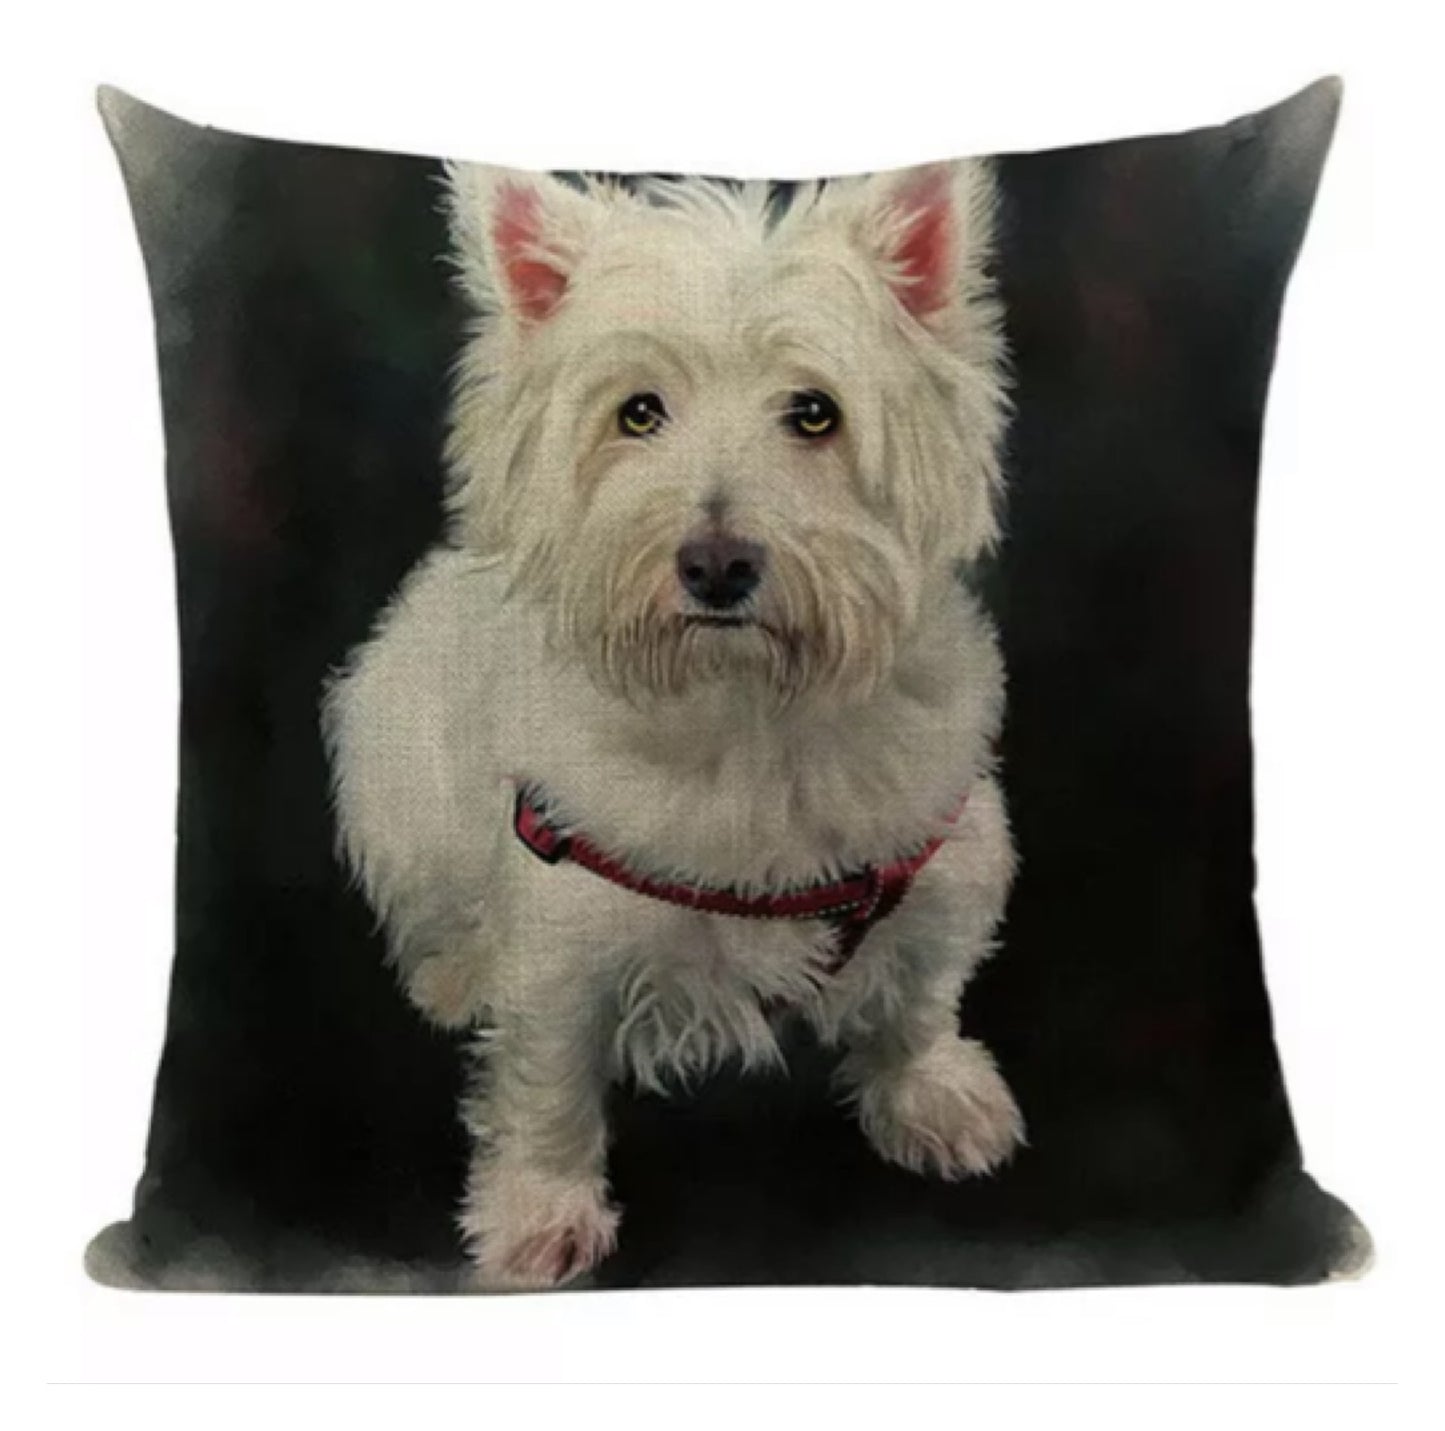 Cushion Pillow Terrier Dog White Peggy - The Renmy Store